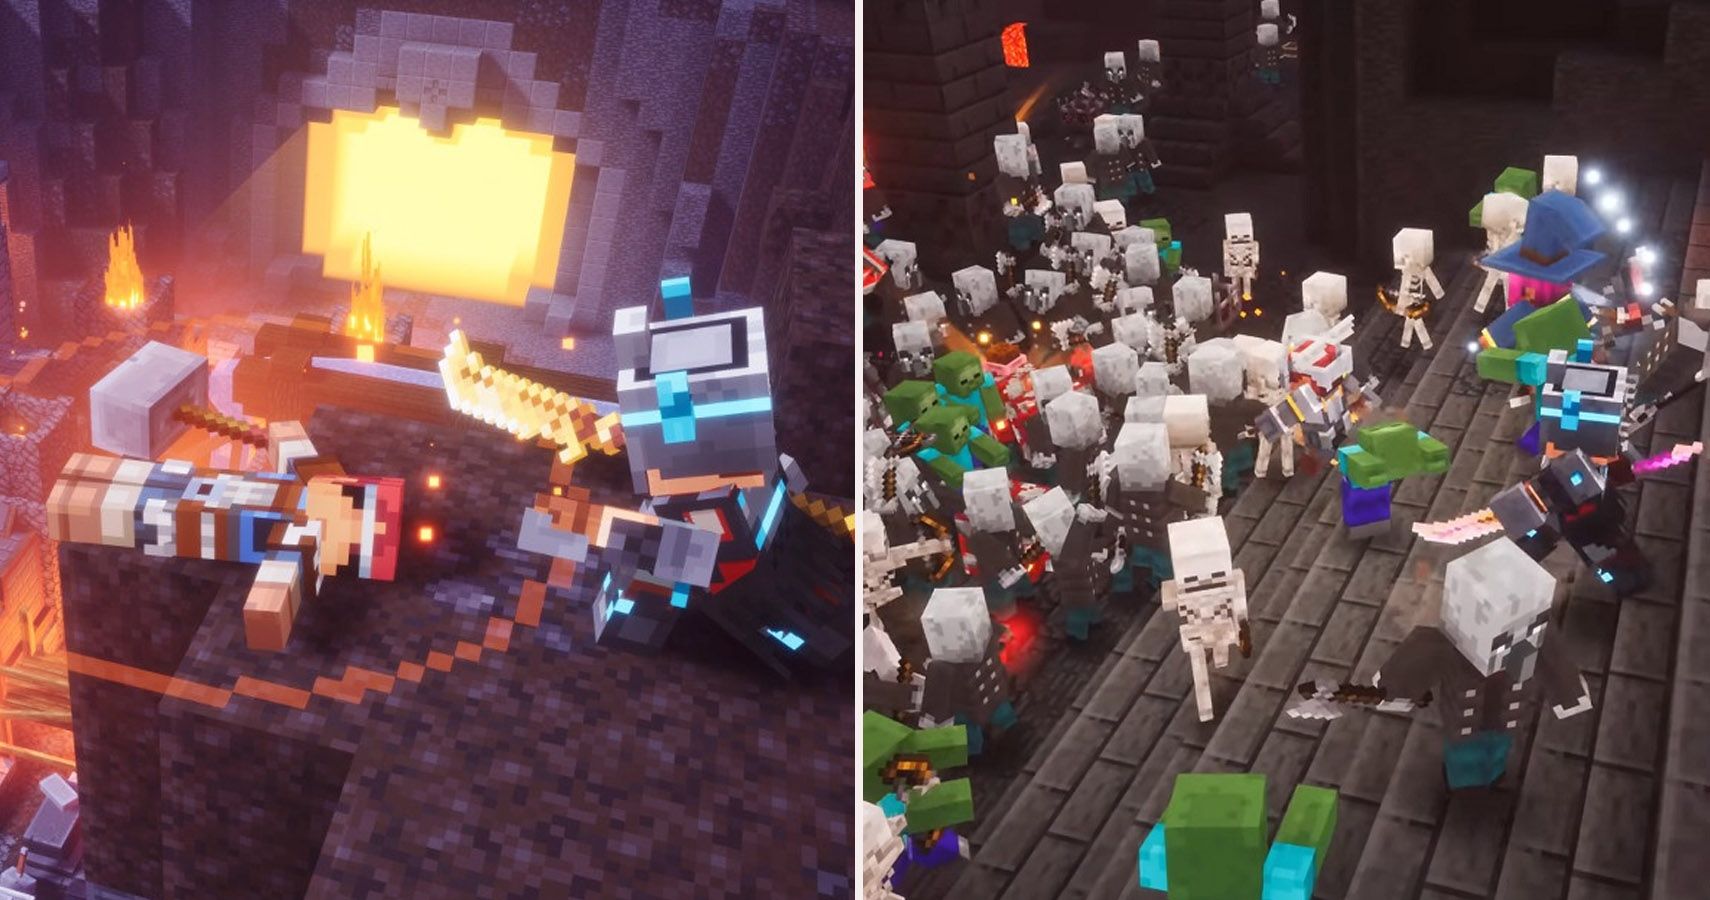 Minecraft Dungeons Best Enchantments - Which should you choose